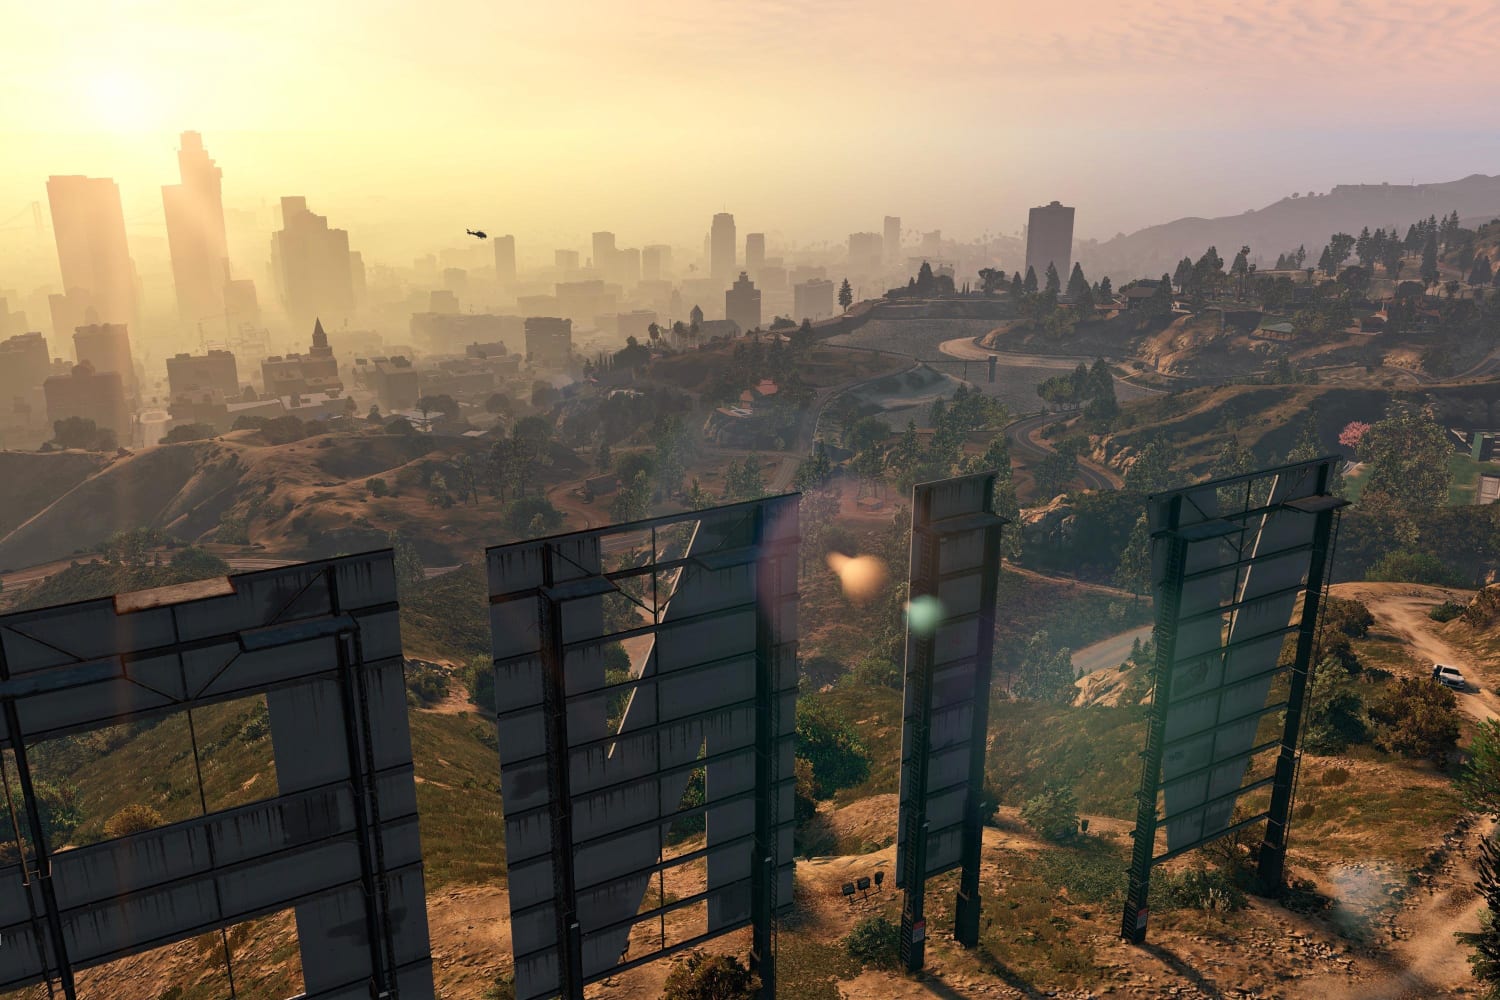 Cities we'd set Grand Theft Auto 6 in